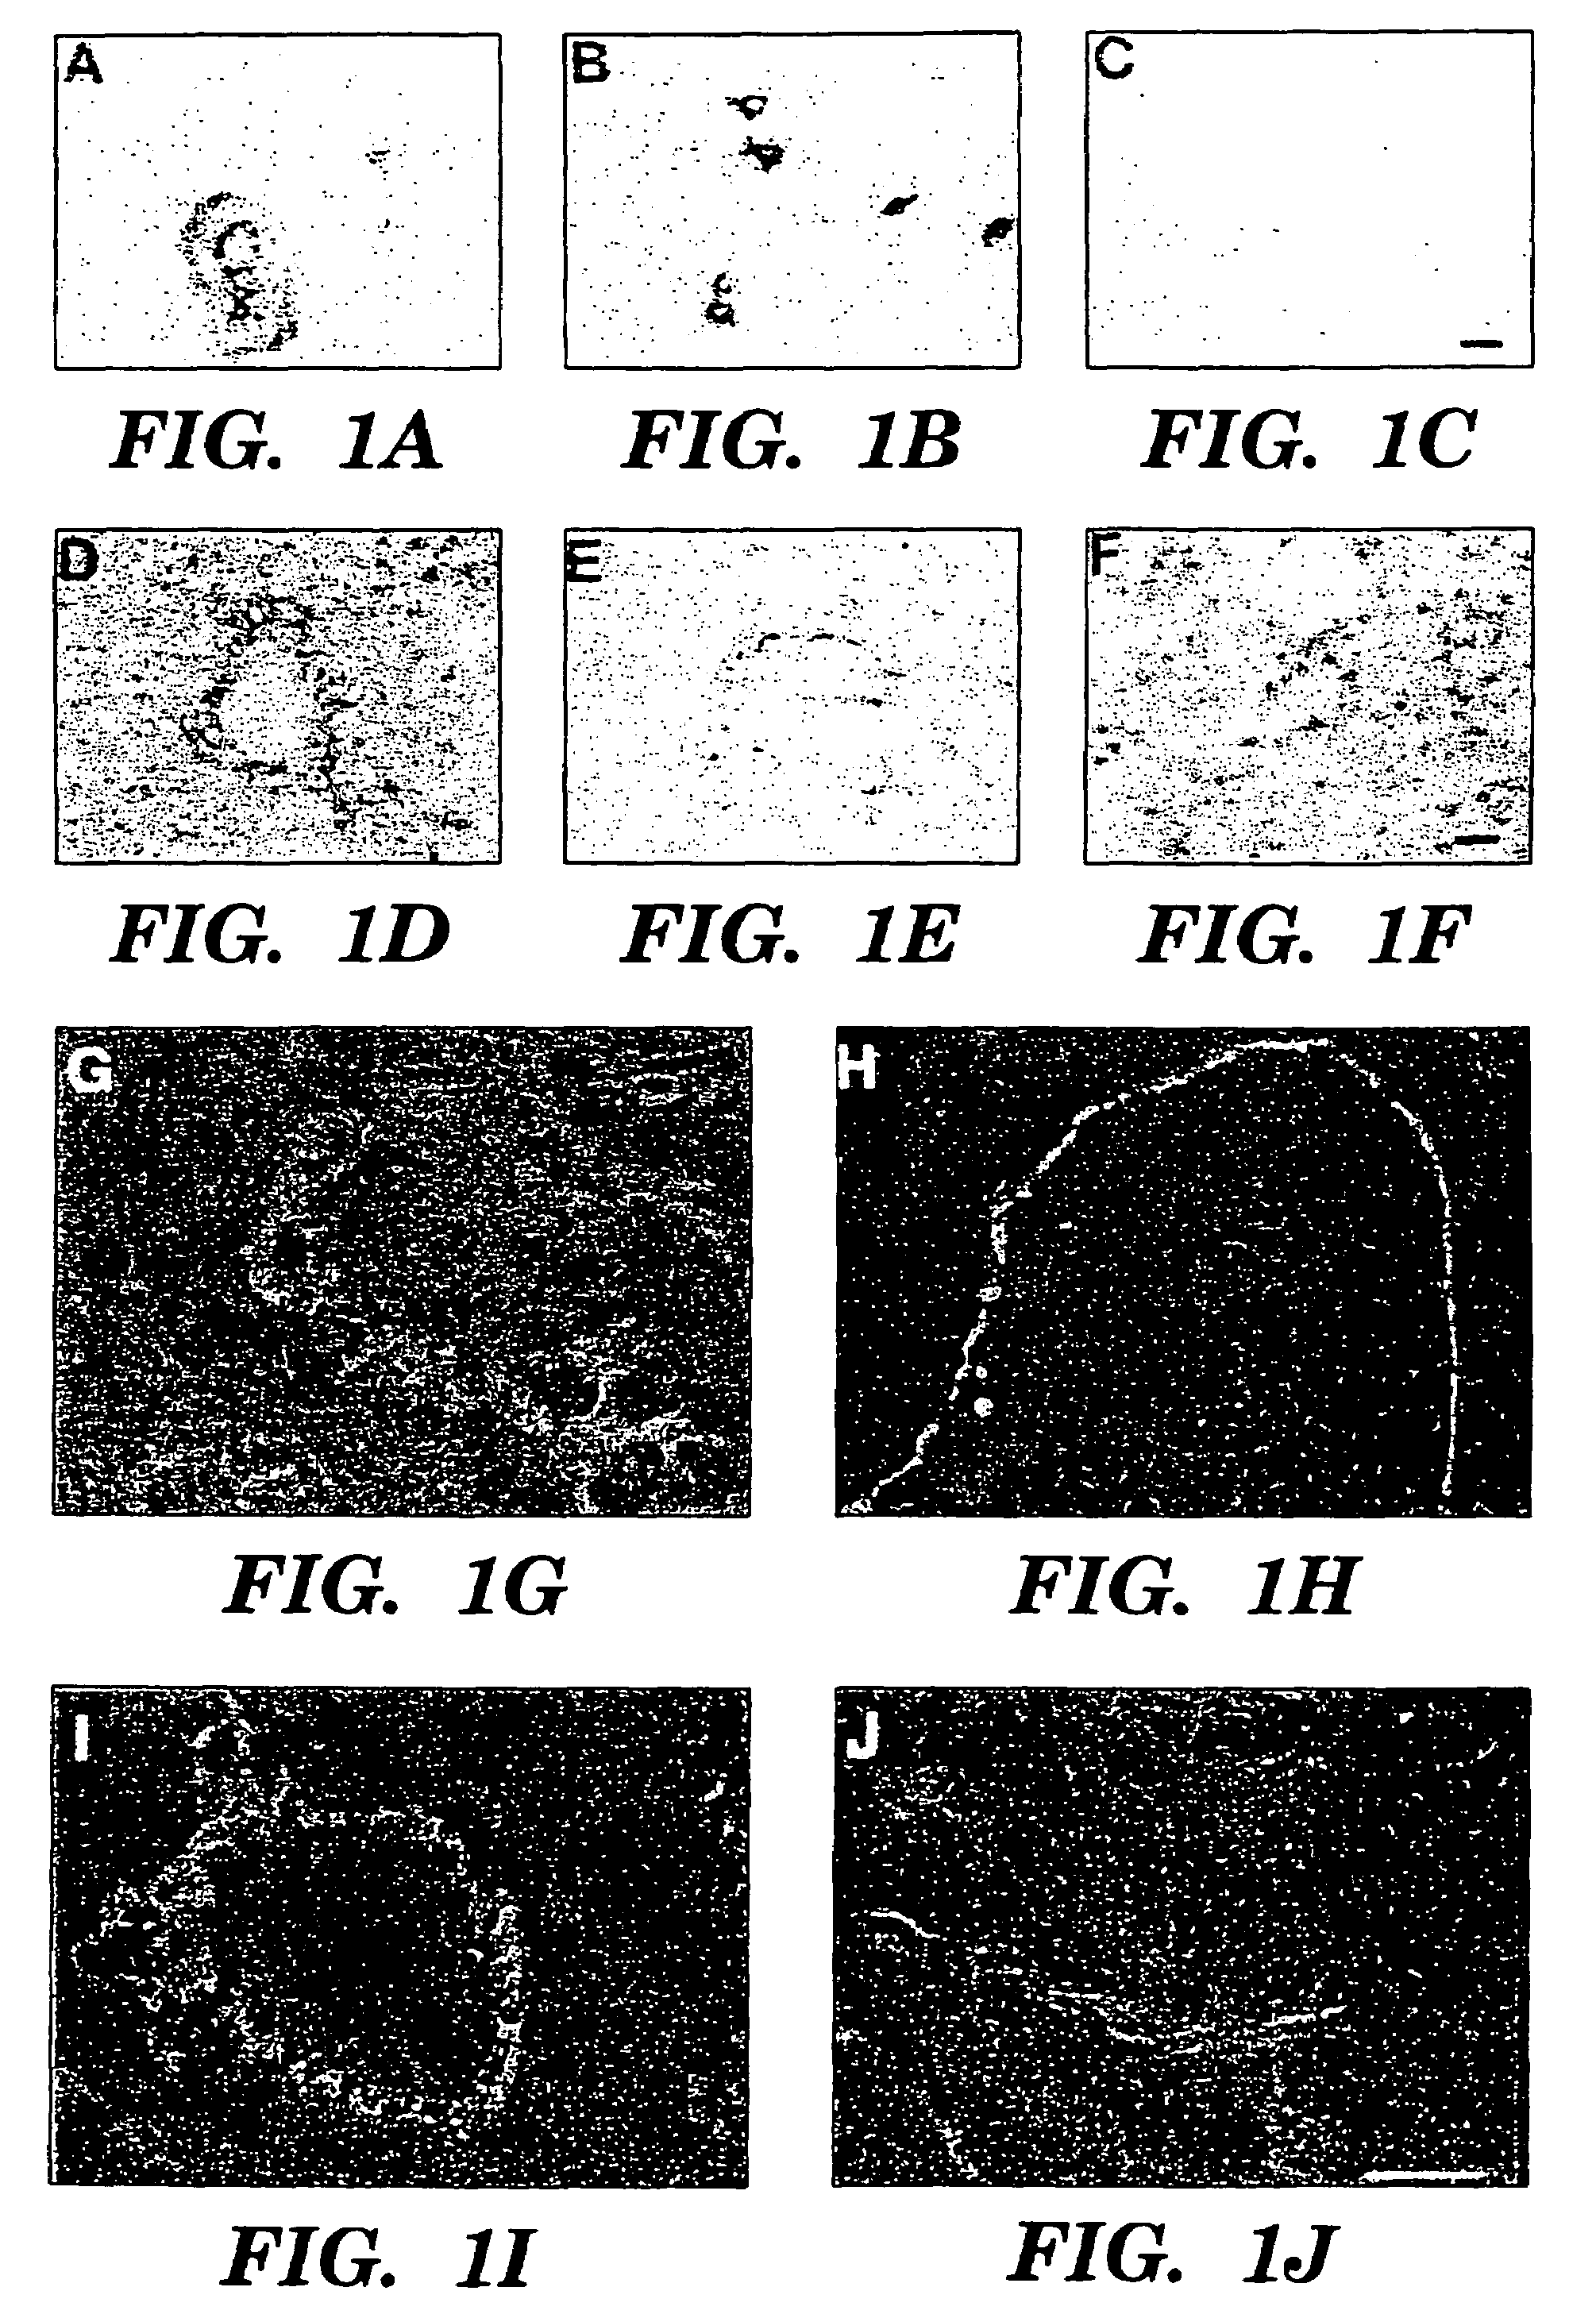 Methods for increasing capillary density and maintaining viability of microvascular cardiac endothelial cells using trk receptor ligands